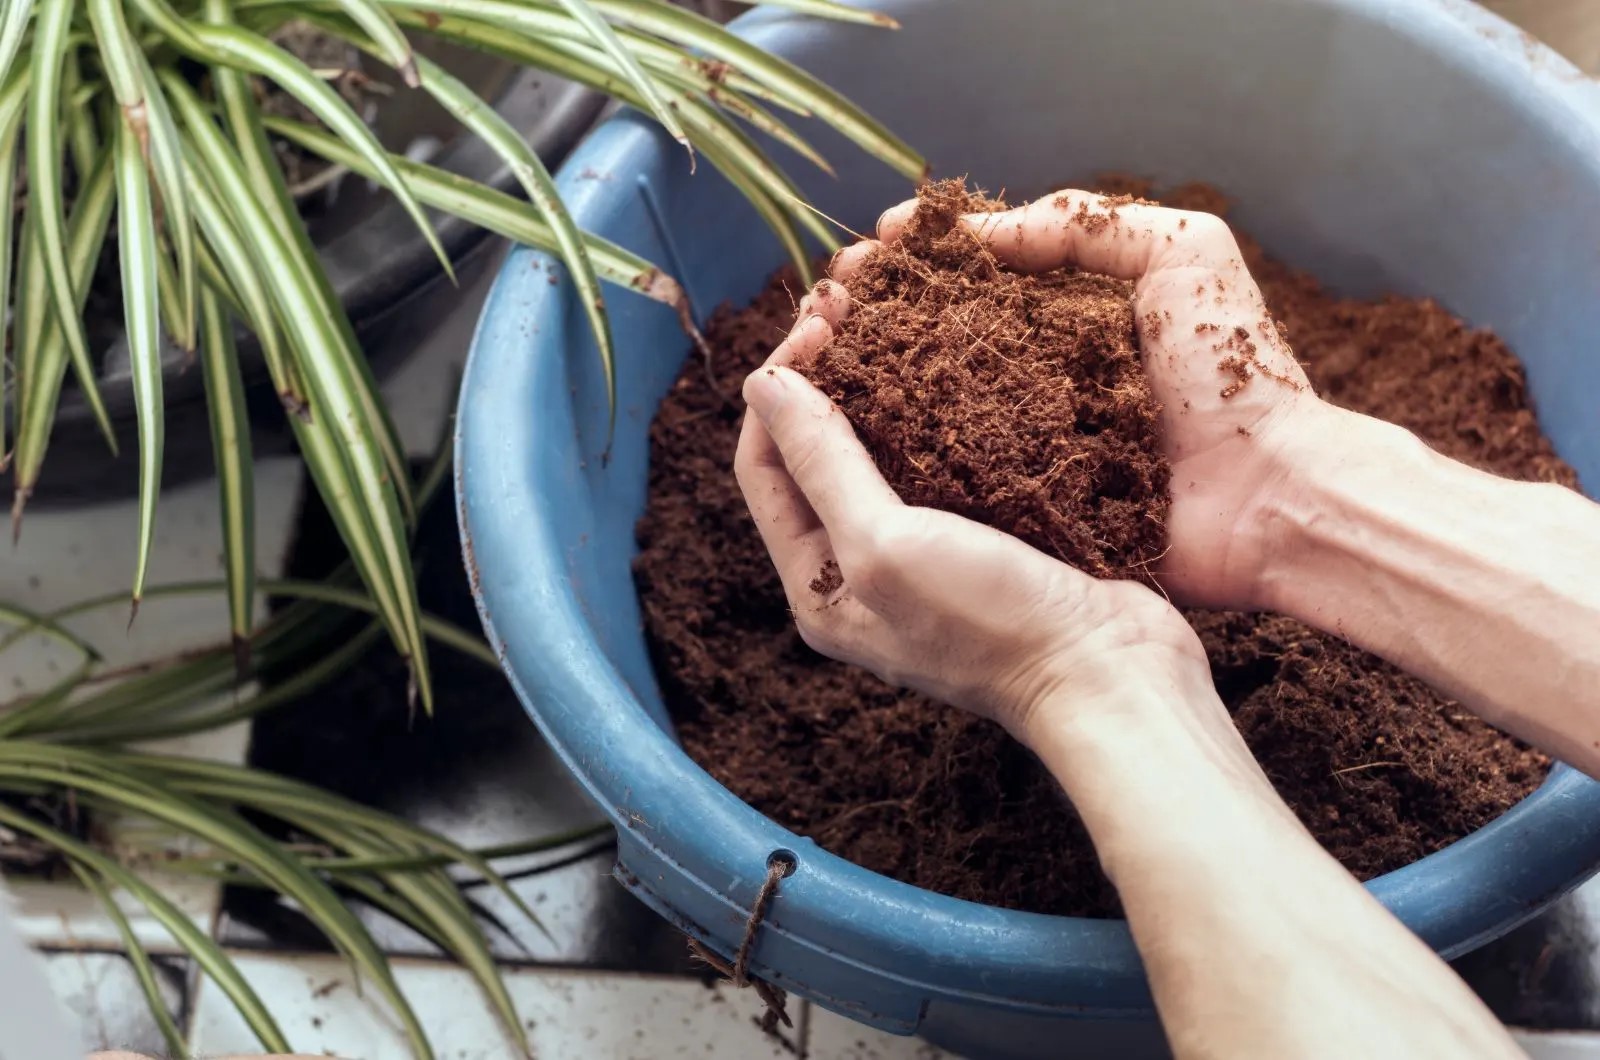 Coir Soil Mix: How Long To Hydrate